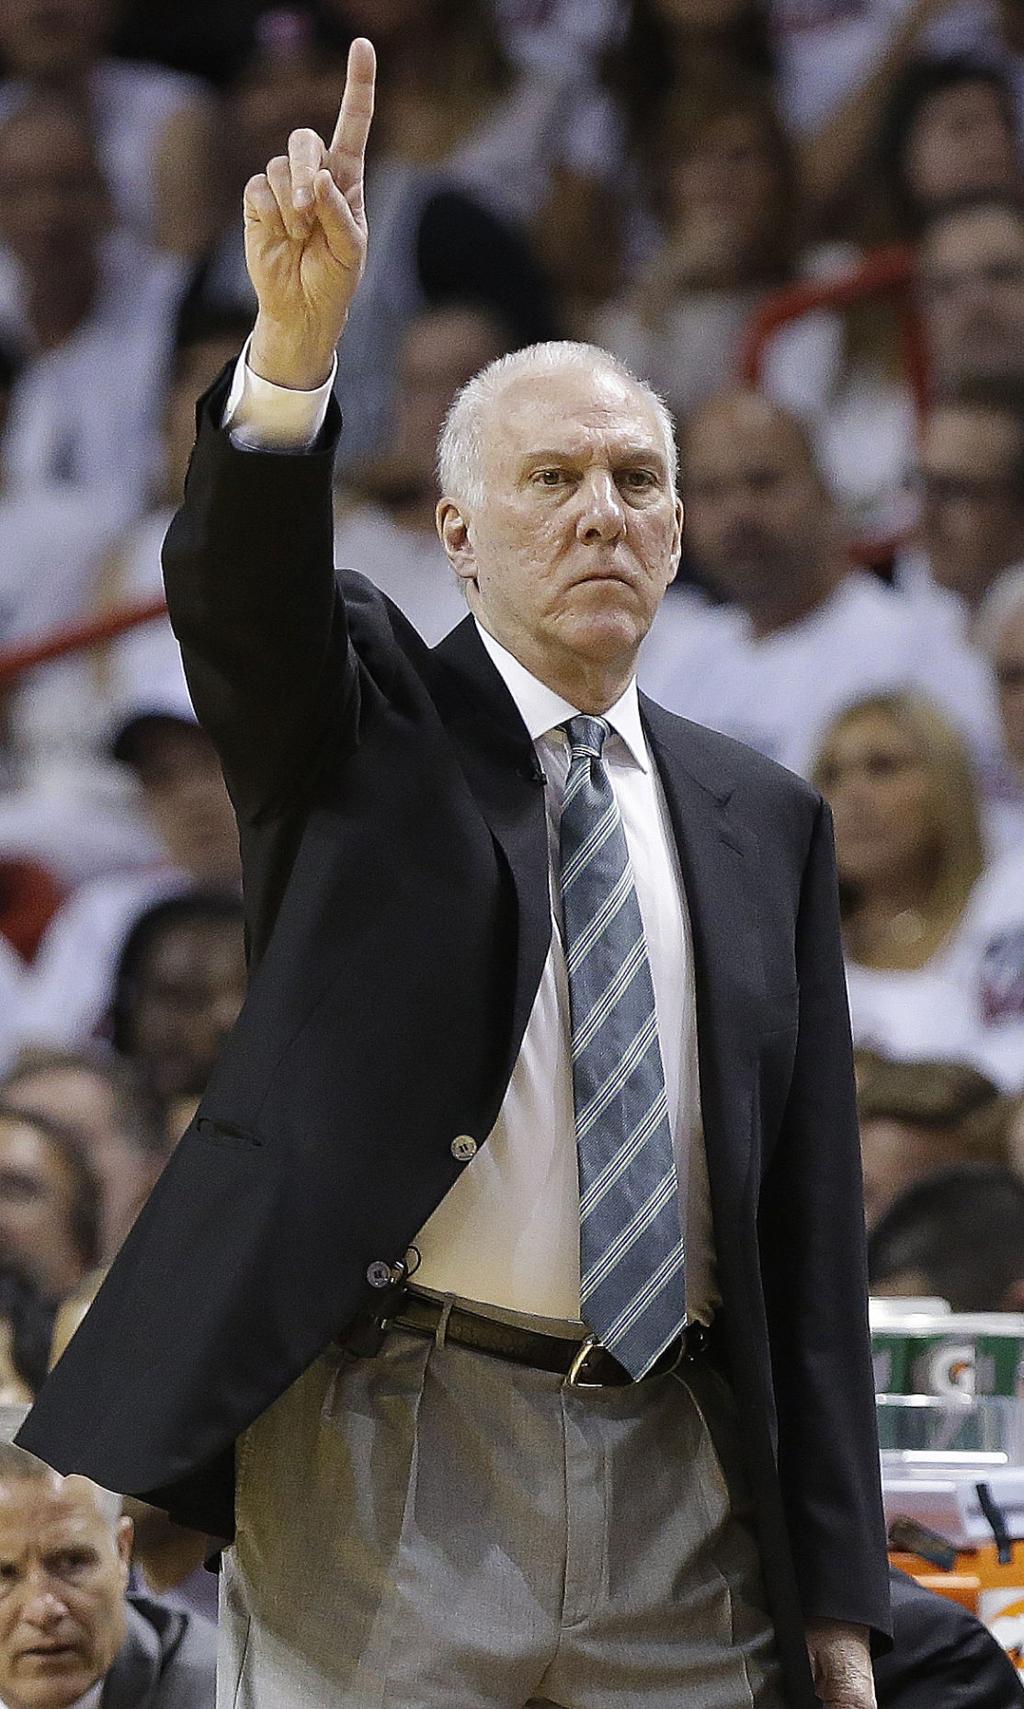 Gregg Popovich: A Decorated NBA Coach With A Div. III Start